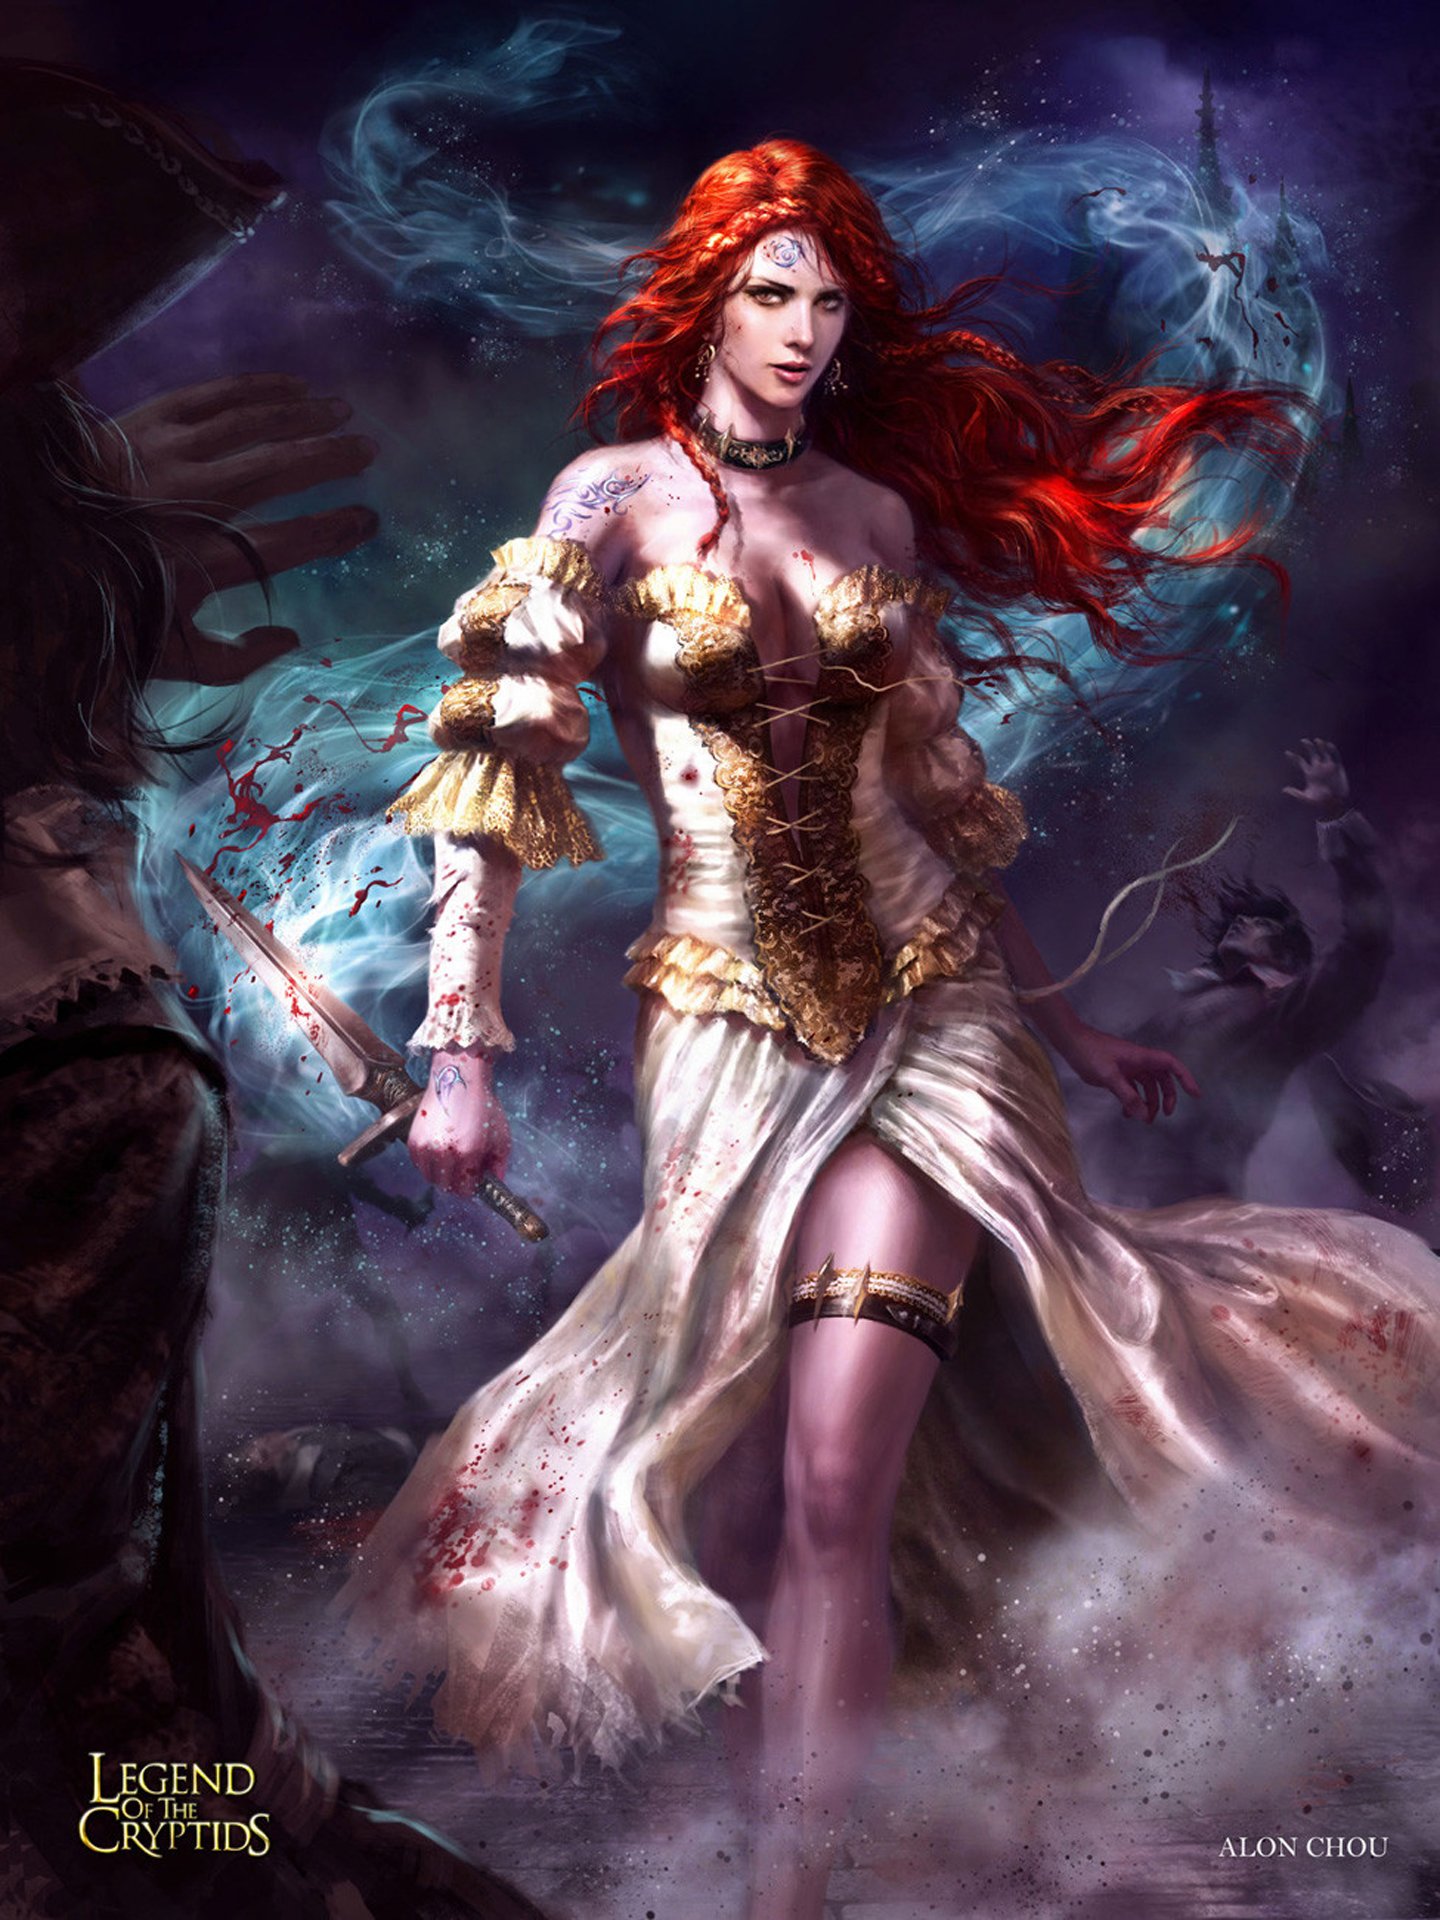 games, Fantasy, Characters, Woman, Legend, Of, The, Cryptids, Red, Hair, Dress Wallpaper